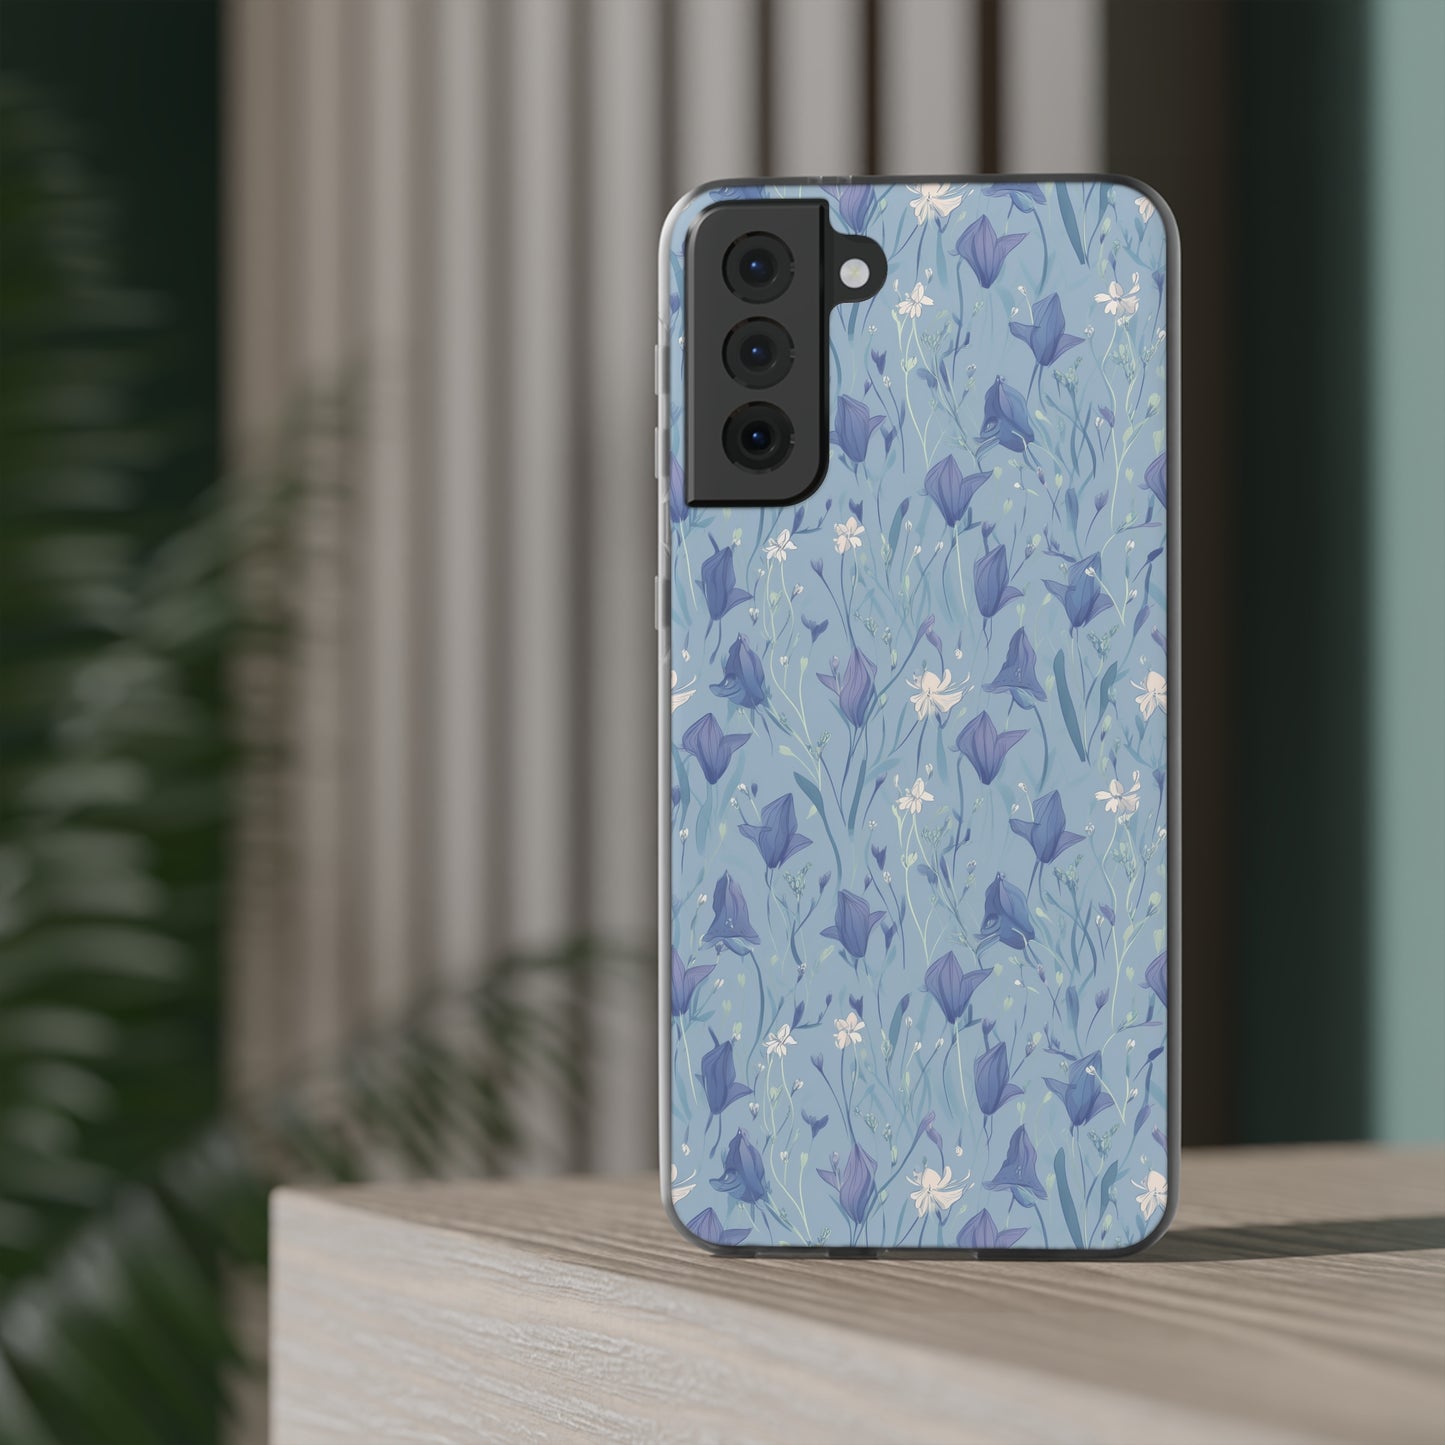 Enchanting Bluebell Harmony Phone Case - Captivating Floral Design - Spring Collection - Flexi Cases Phone Case Pattern Symphony Samsung Galaxy S21 Plus with gift packaging  